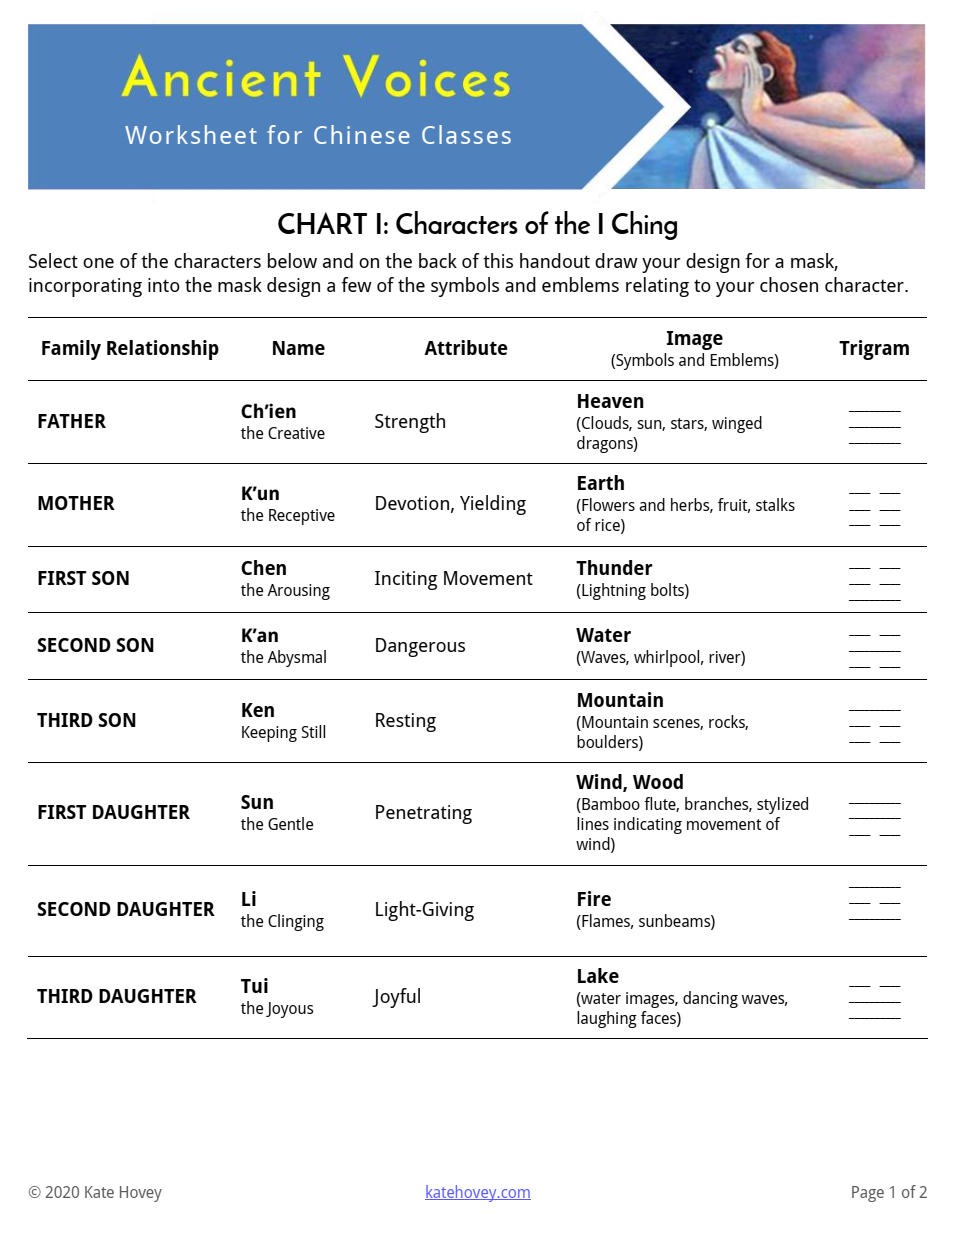 Kate Hovey's Ancient Voices - Worksheet for Chinese Classes